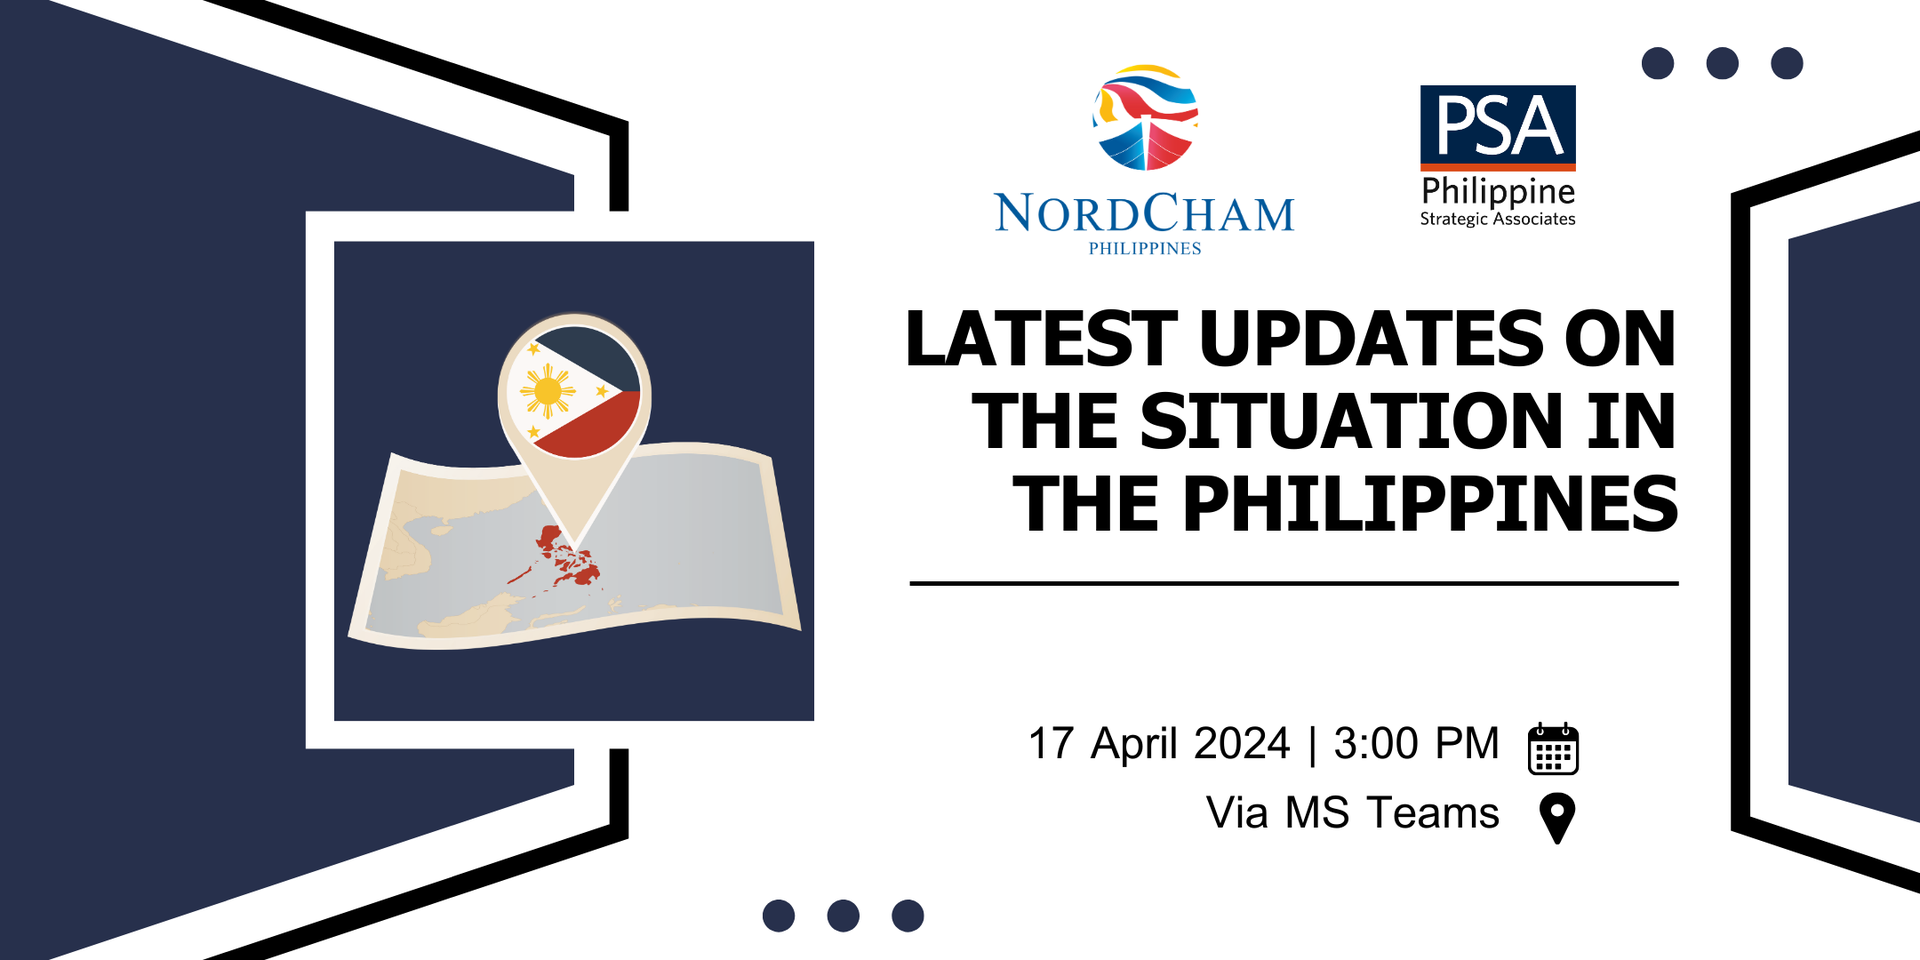 thumbnails [VIRTUAL EVENT] LATEST UPDATES ON THE SITUATION IN THE PHILIPPINES WITH PSA